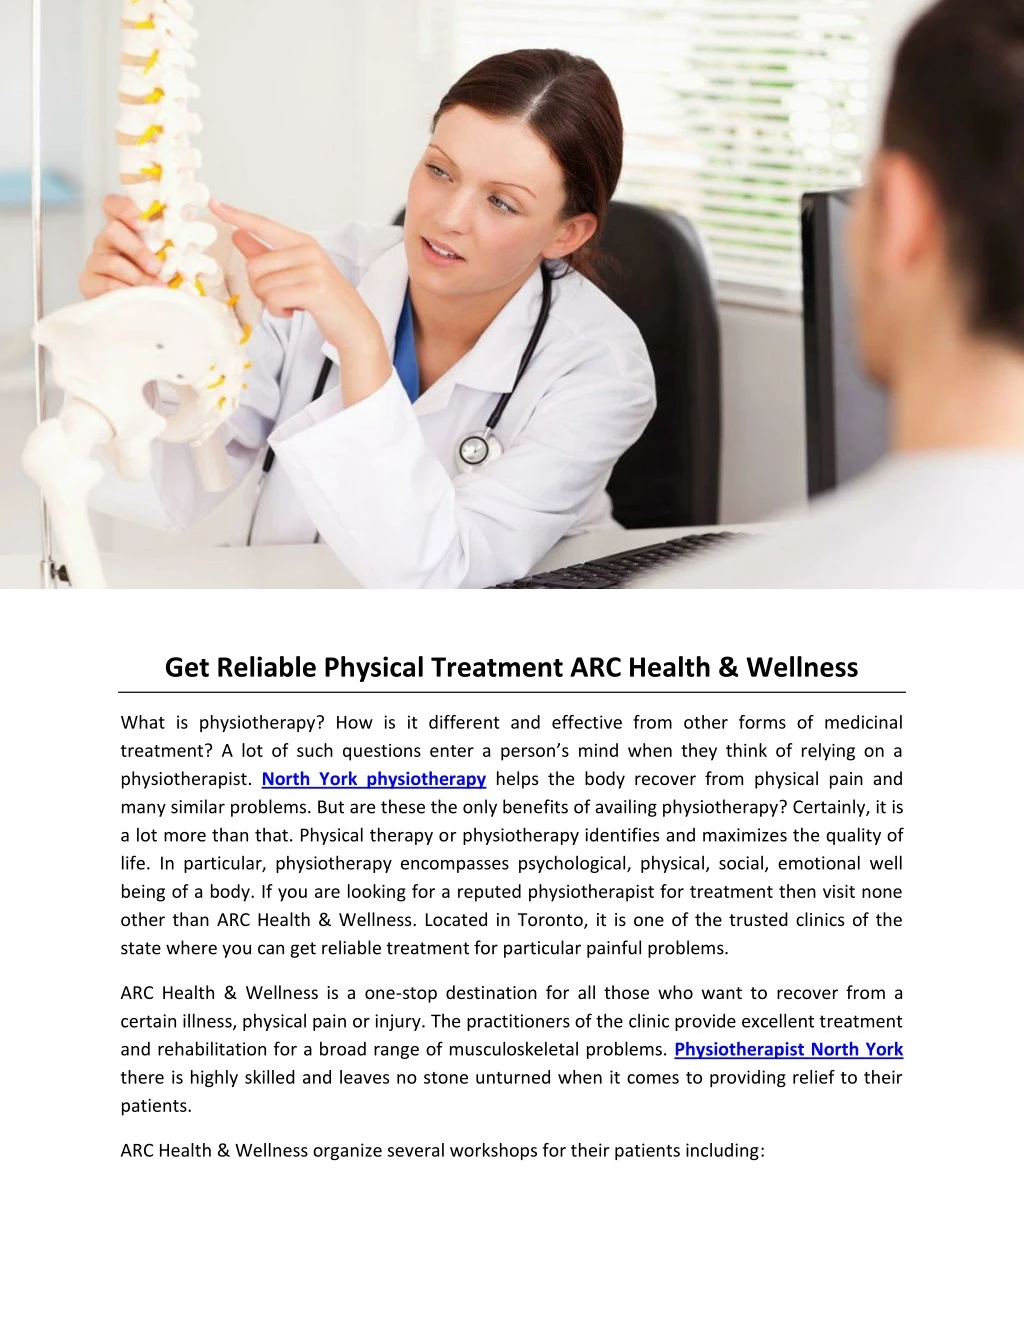 get reliable physical treatment arc health